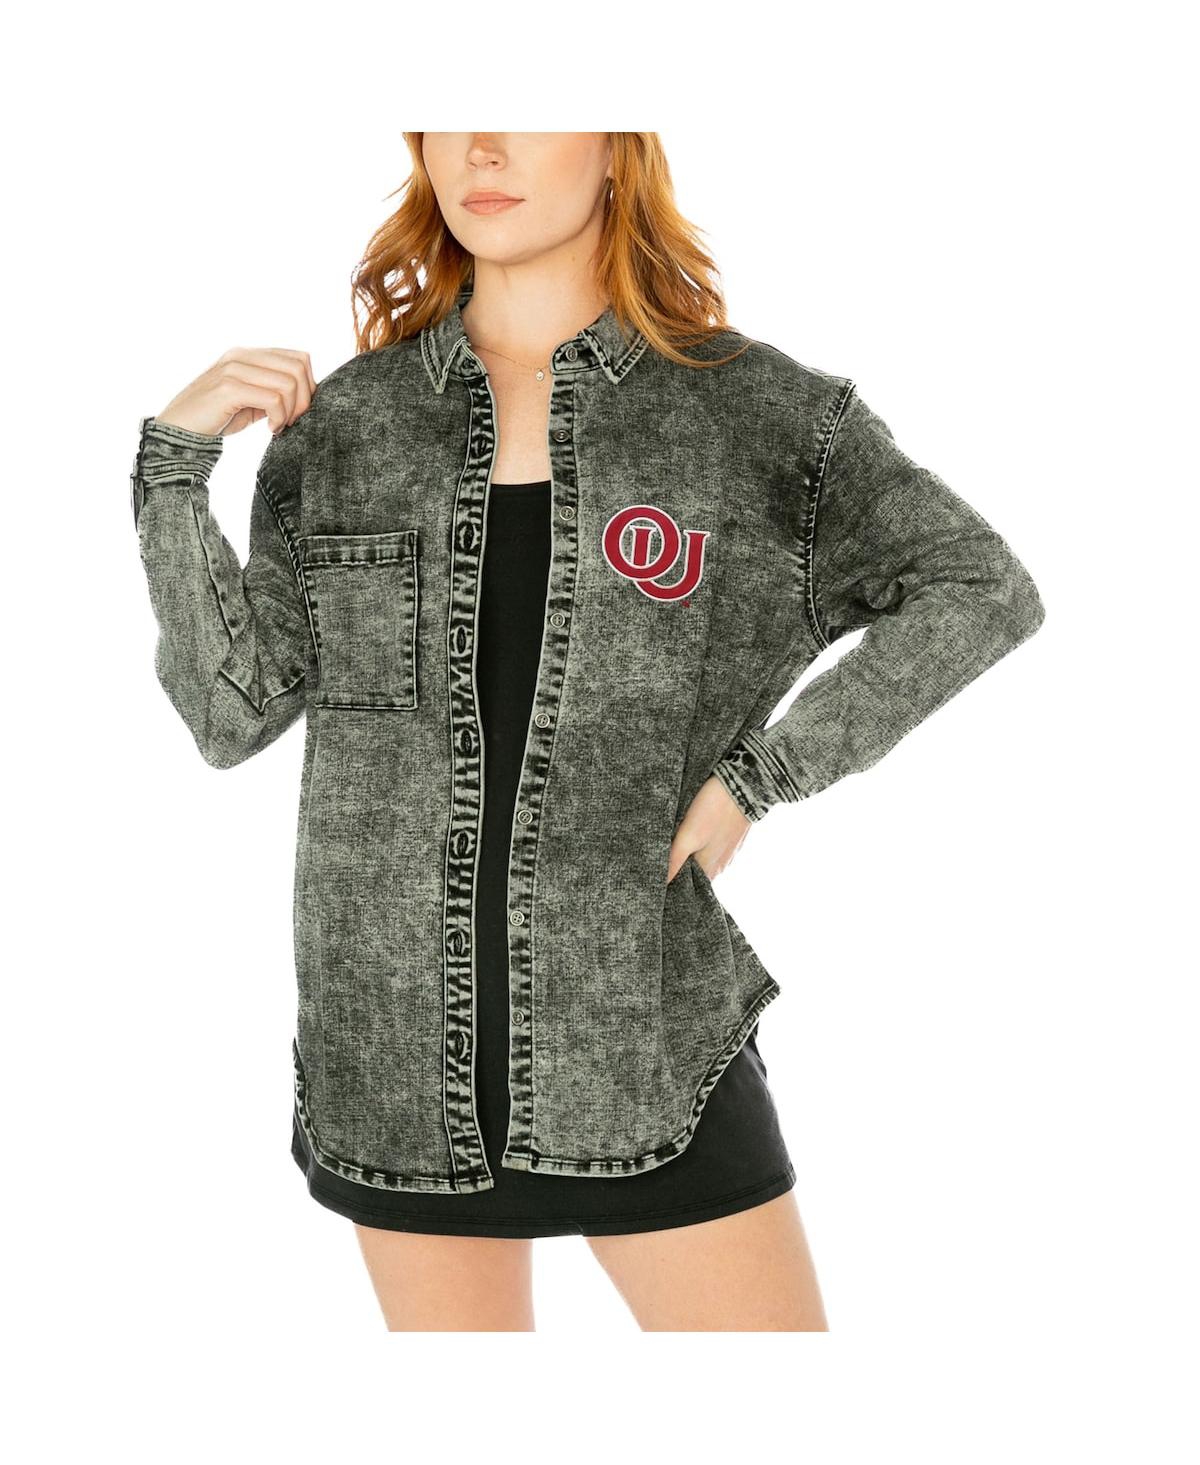 Shop Gameday Couture Women's  Charcoal Oklahoma Sooners Multi-hit Tri-blend Oversized Button-up Denim Jack